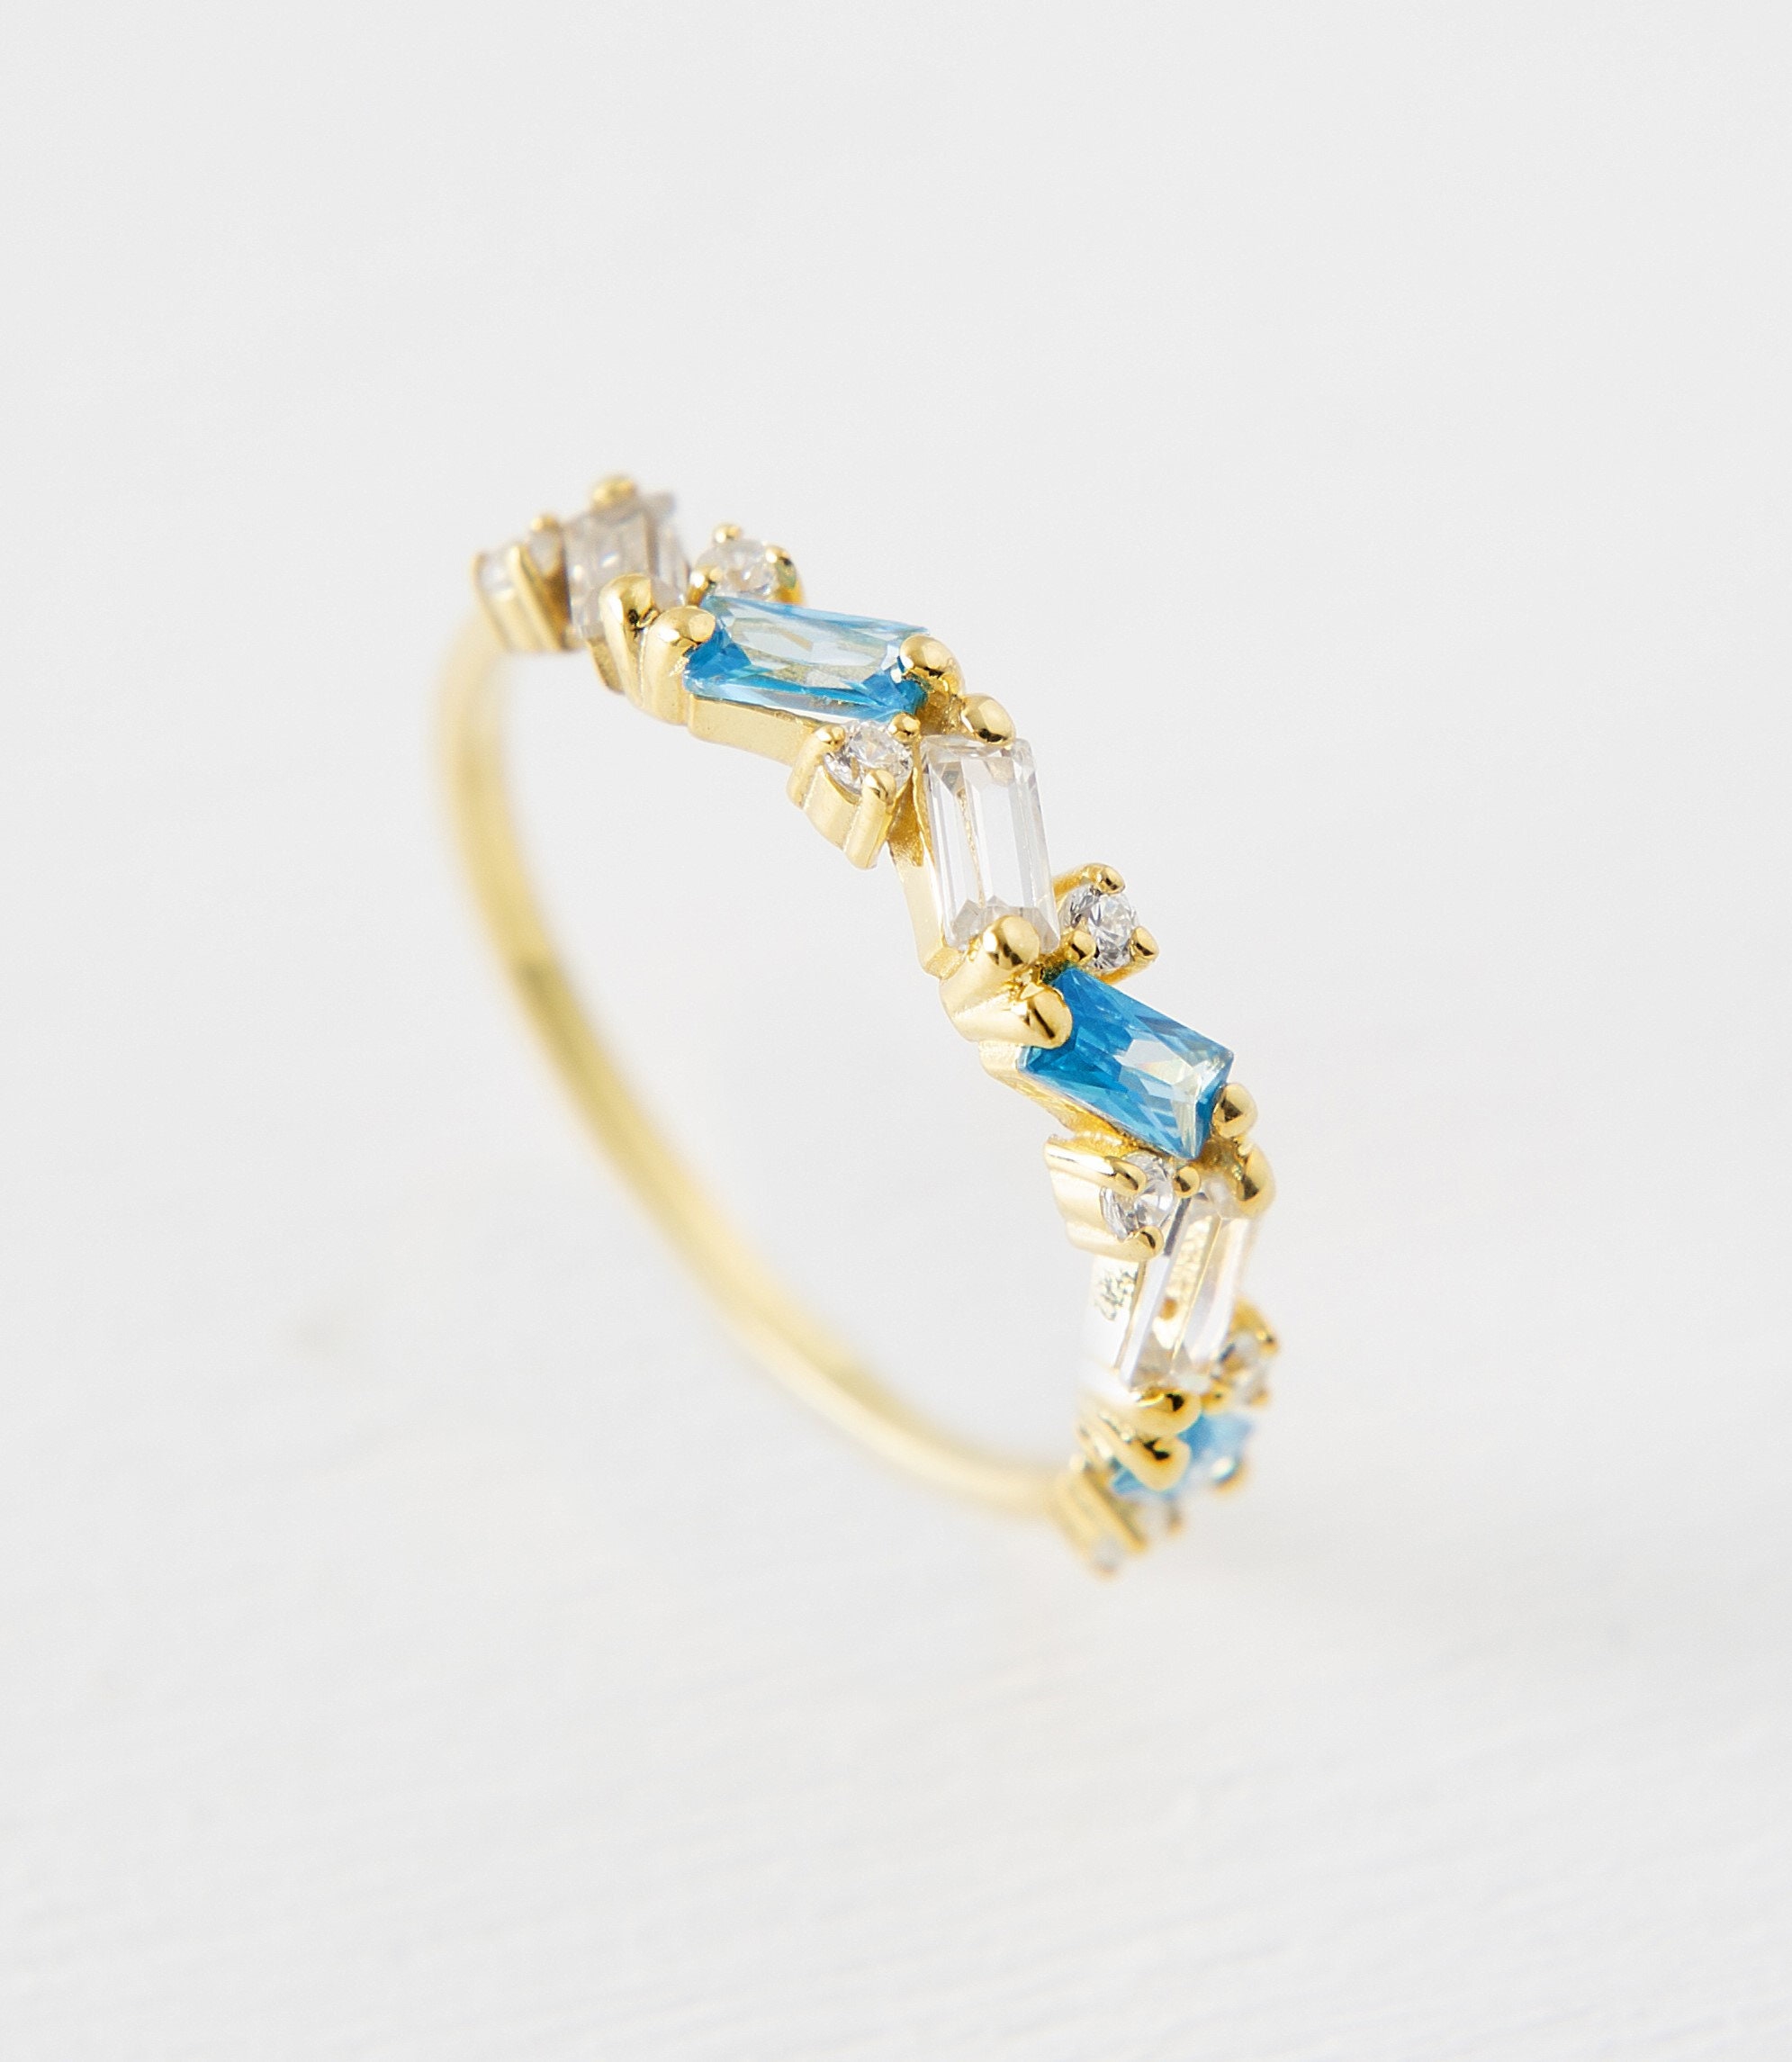 14K Gold Tiny Ring, 18K Colored Baguette Aquamarine Stone Ring, Minimalist Baguette Gold Ring, Tiny Baguette Ring, Delicate Ringthumbnail